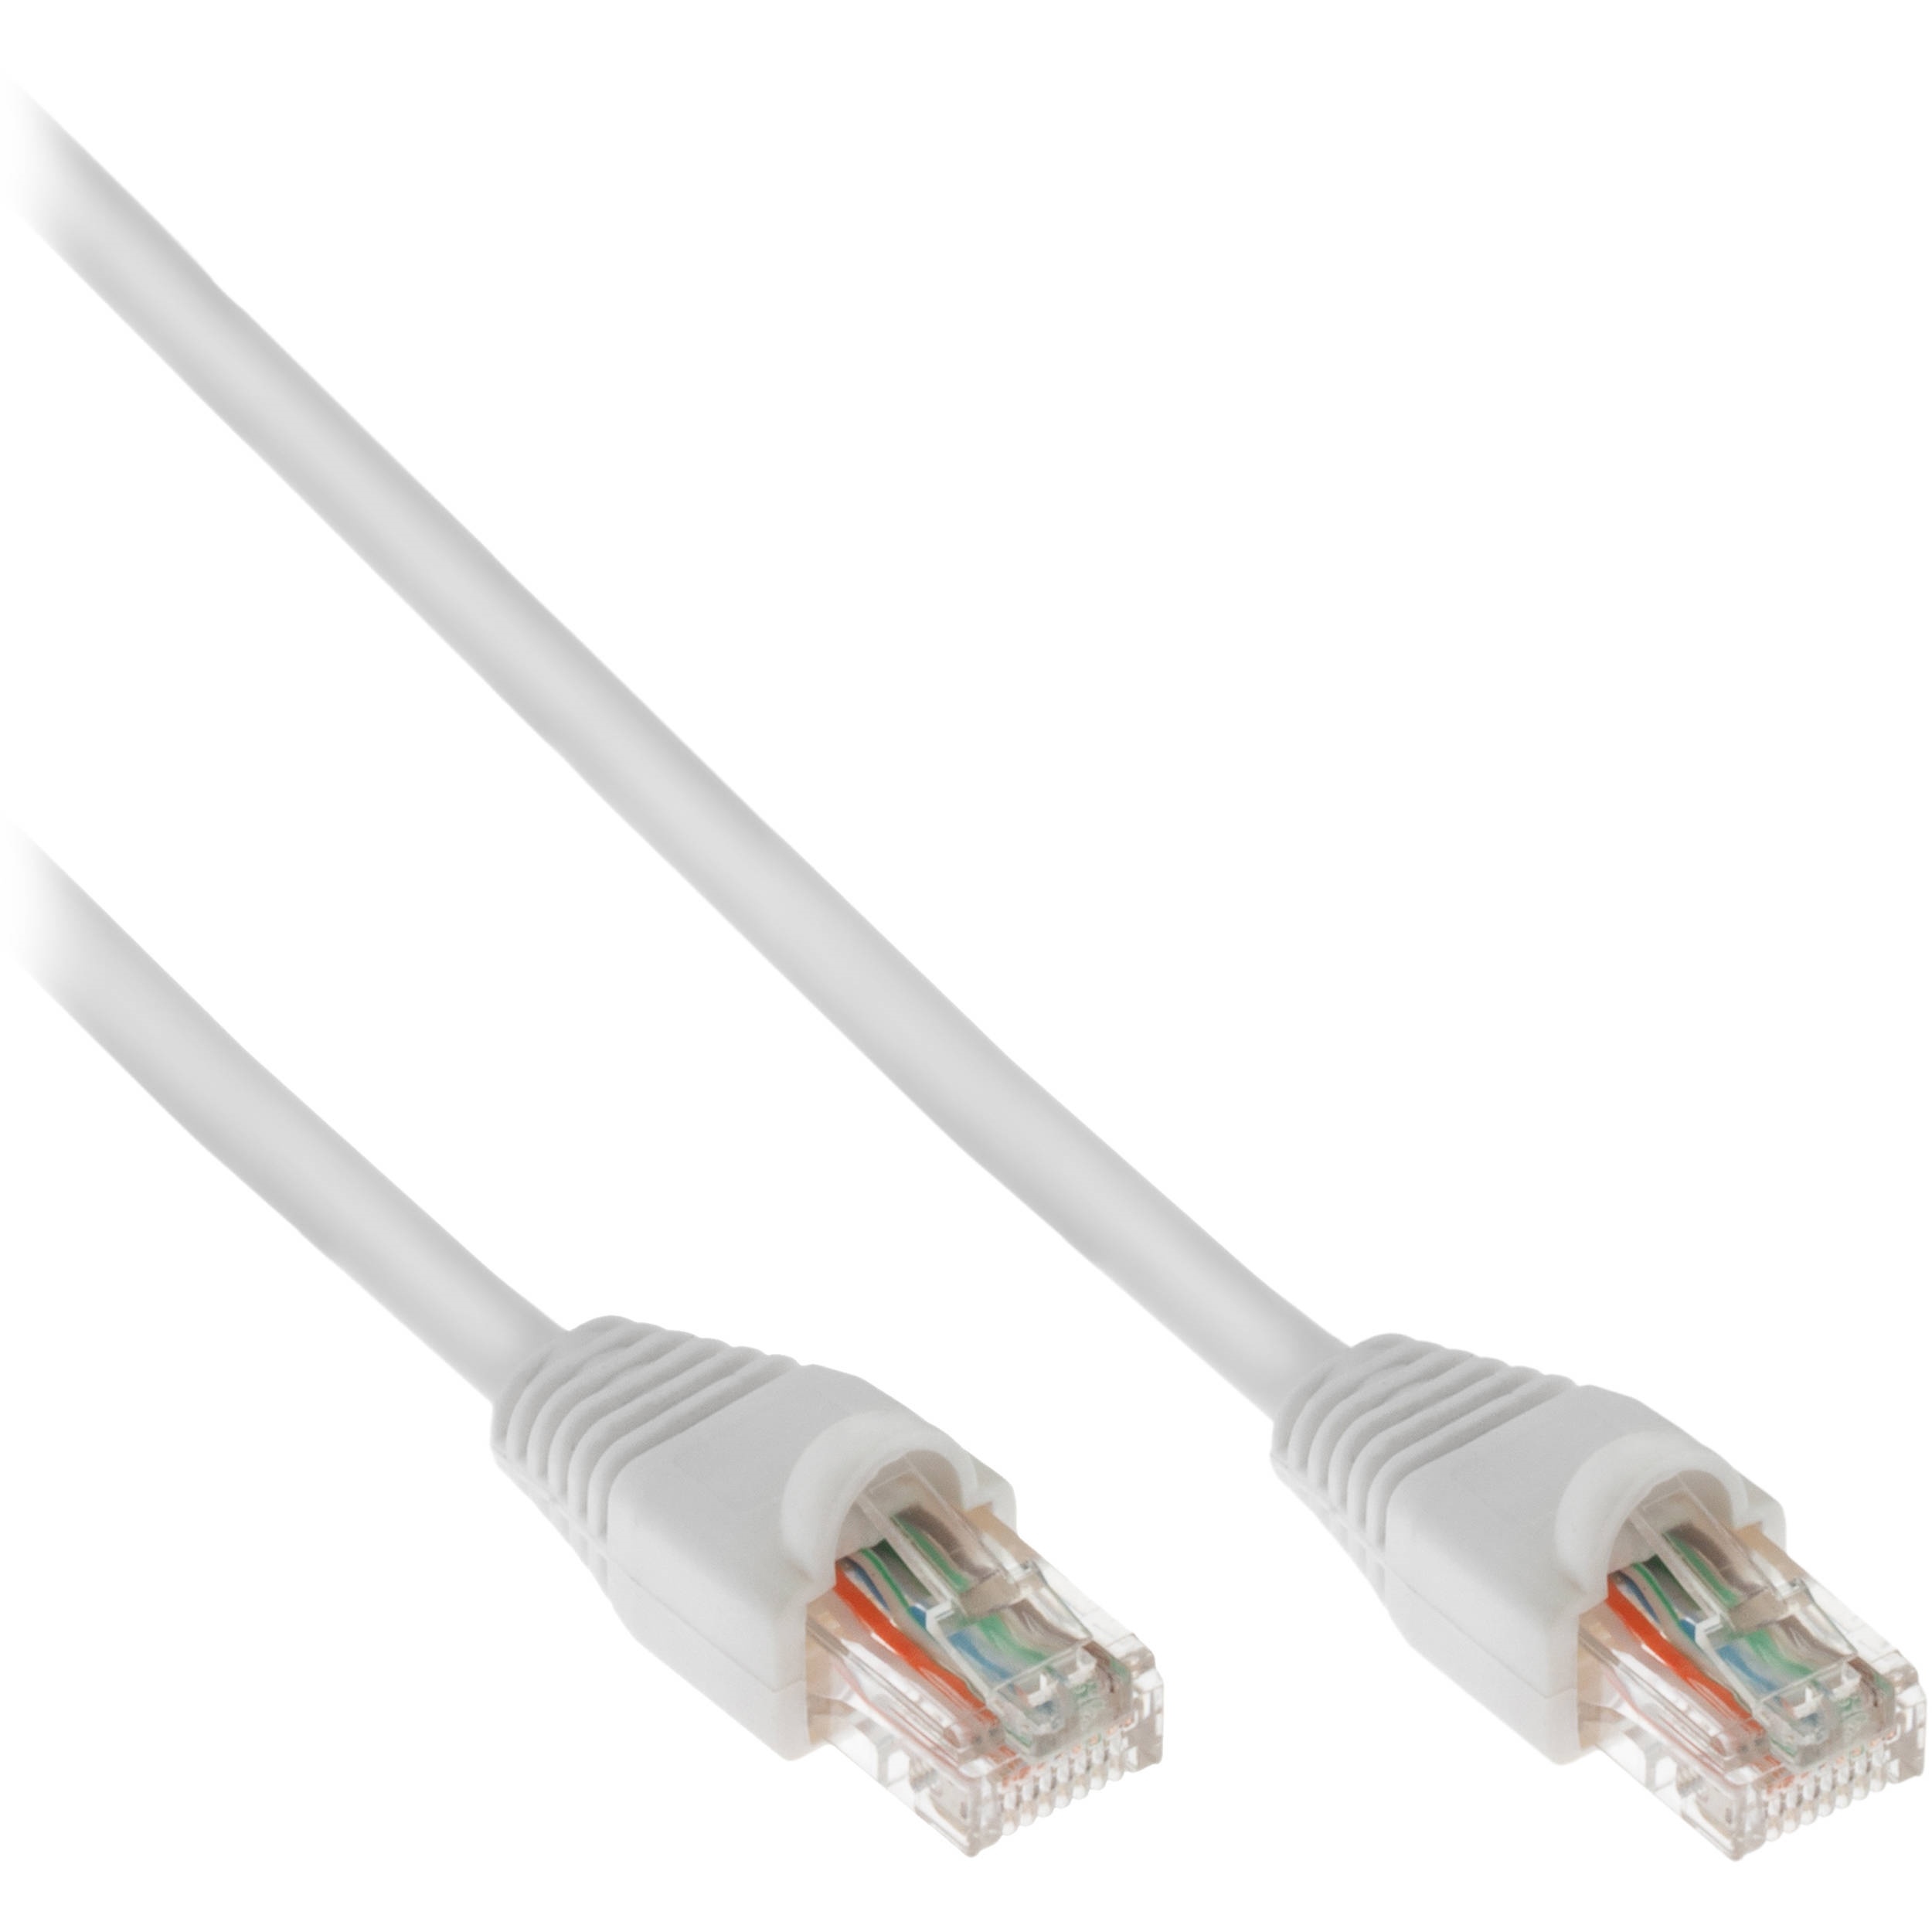 Pearstone Cat 6a Snagless Patch Cable (50', White)